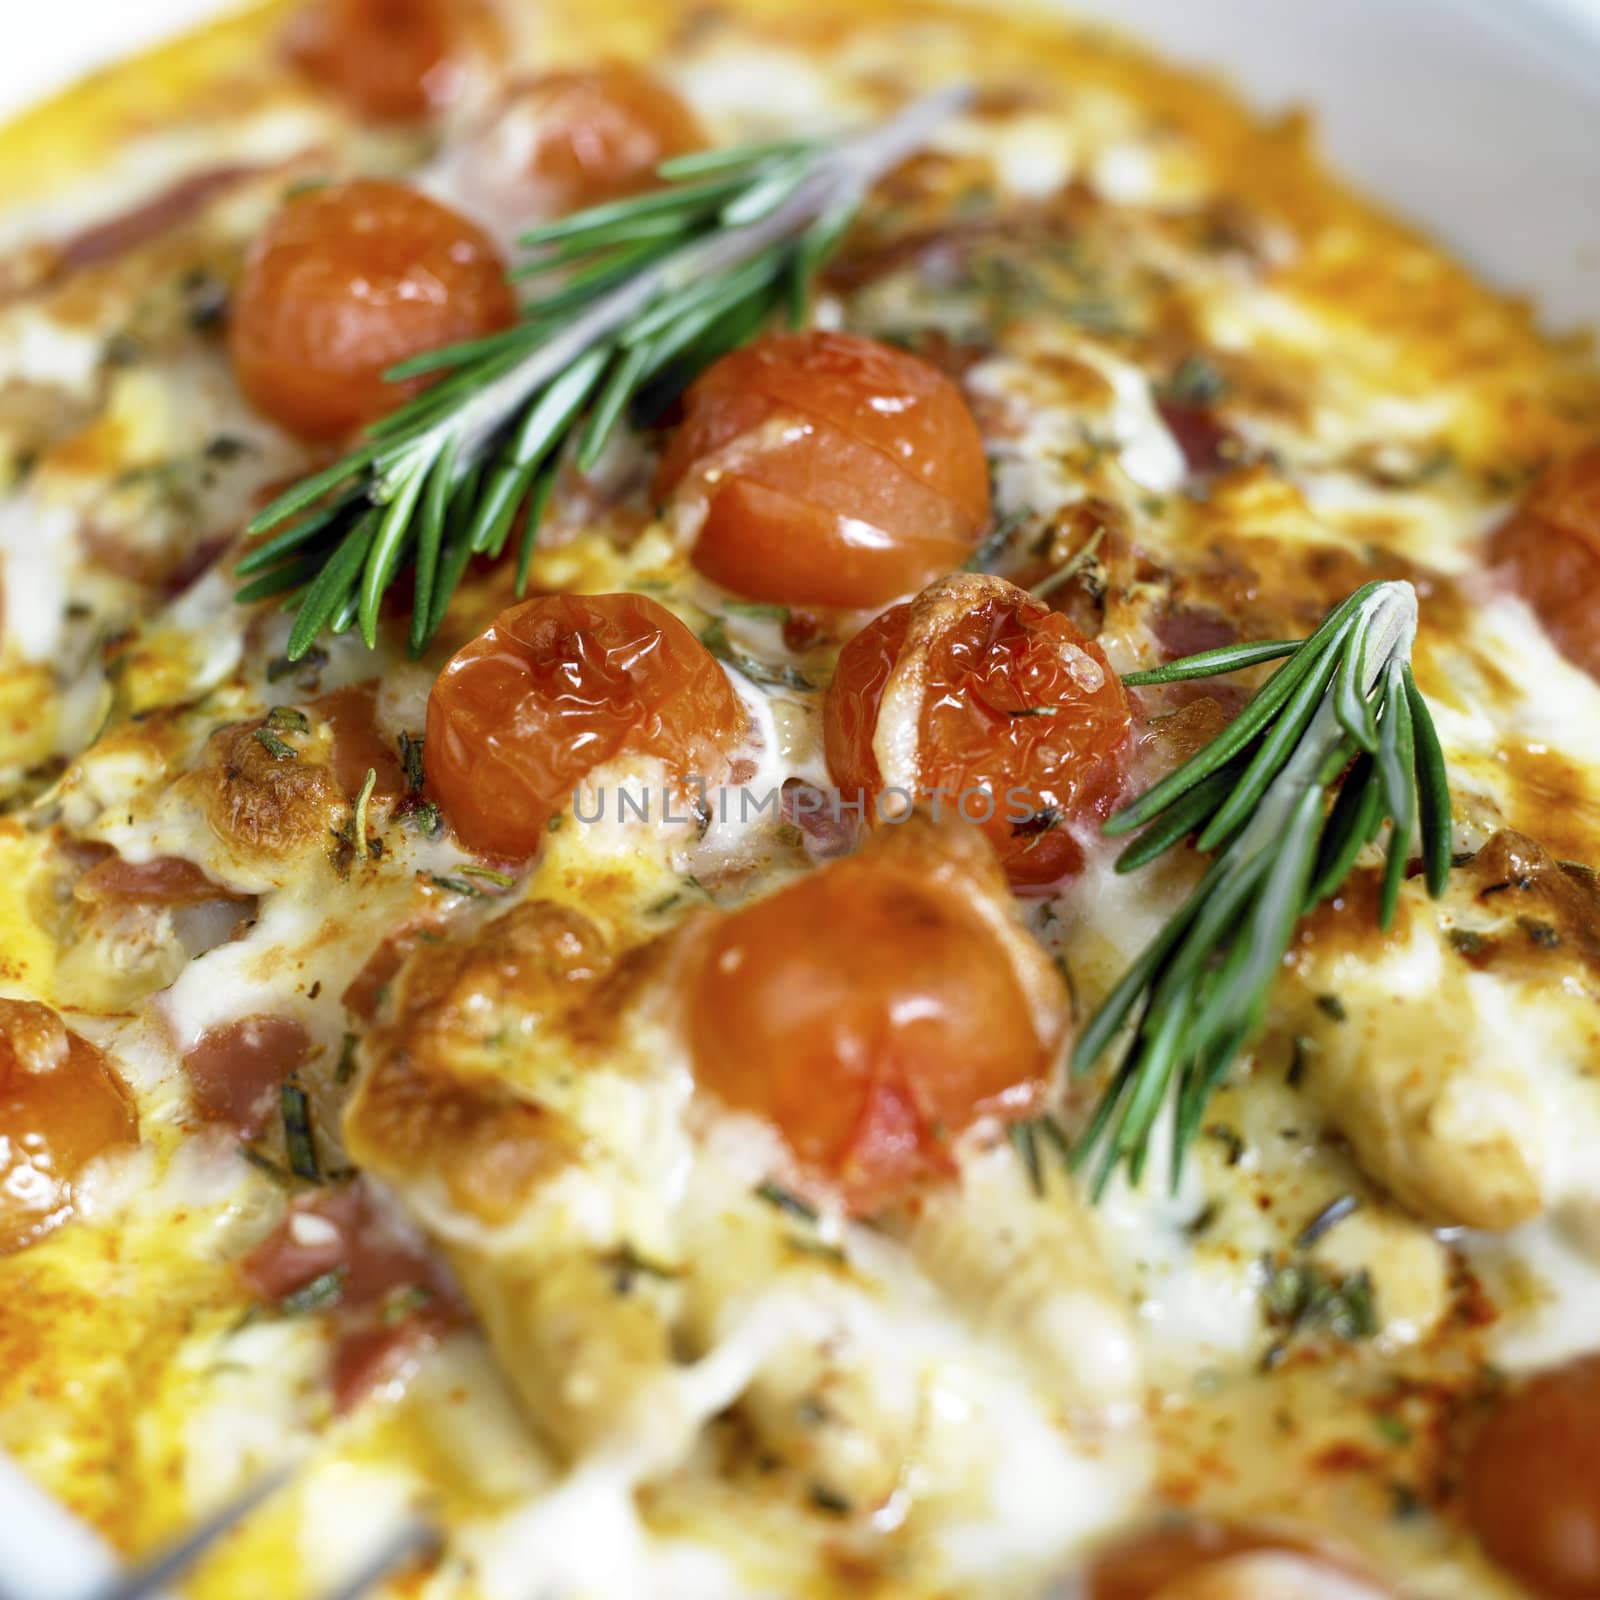 baked white asparagus with cherry tomatoes on rosemary